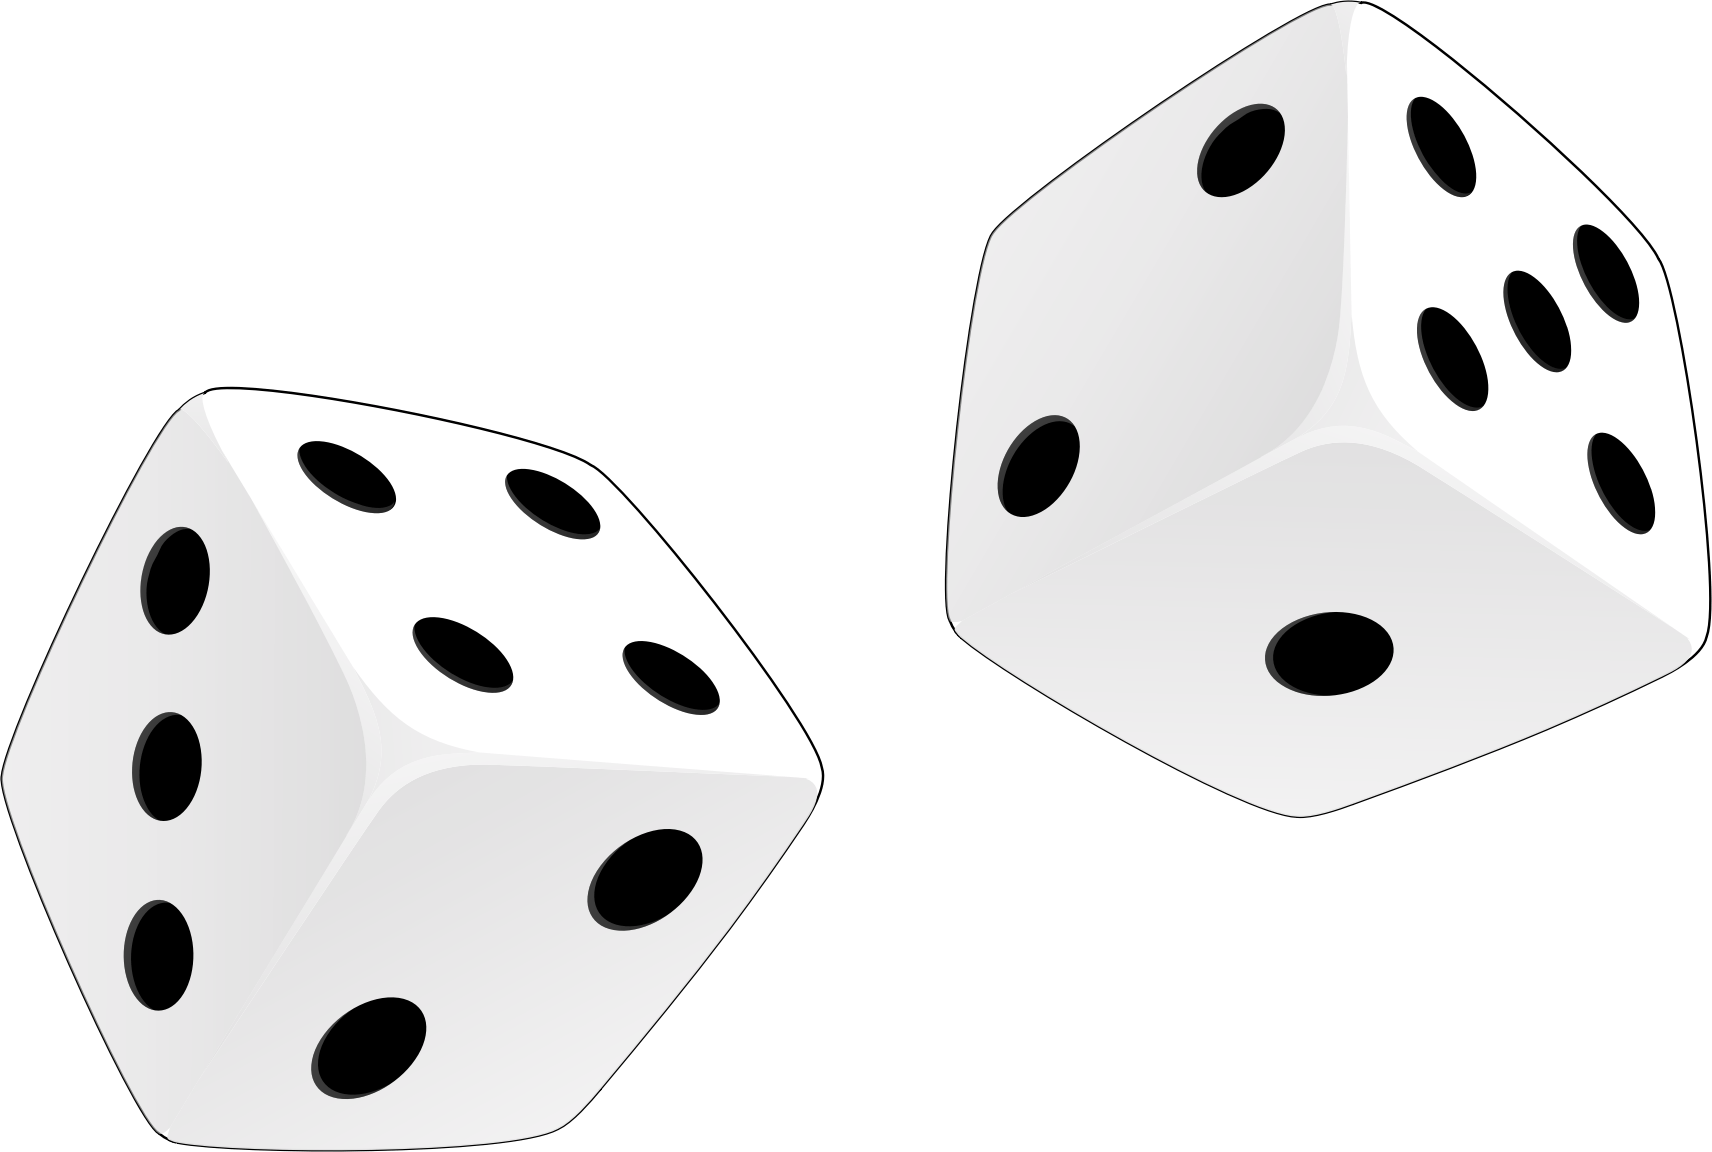 dice-clipart-jpeg-18.png